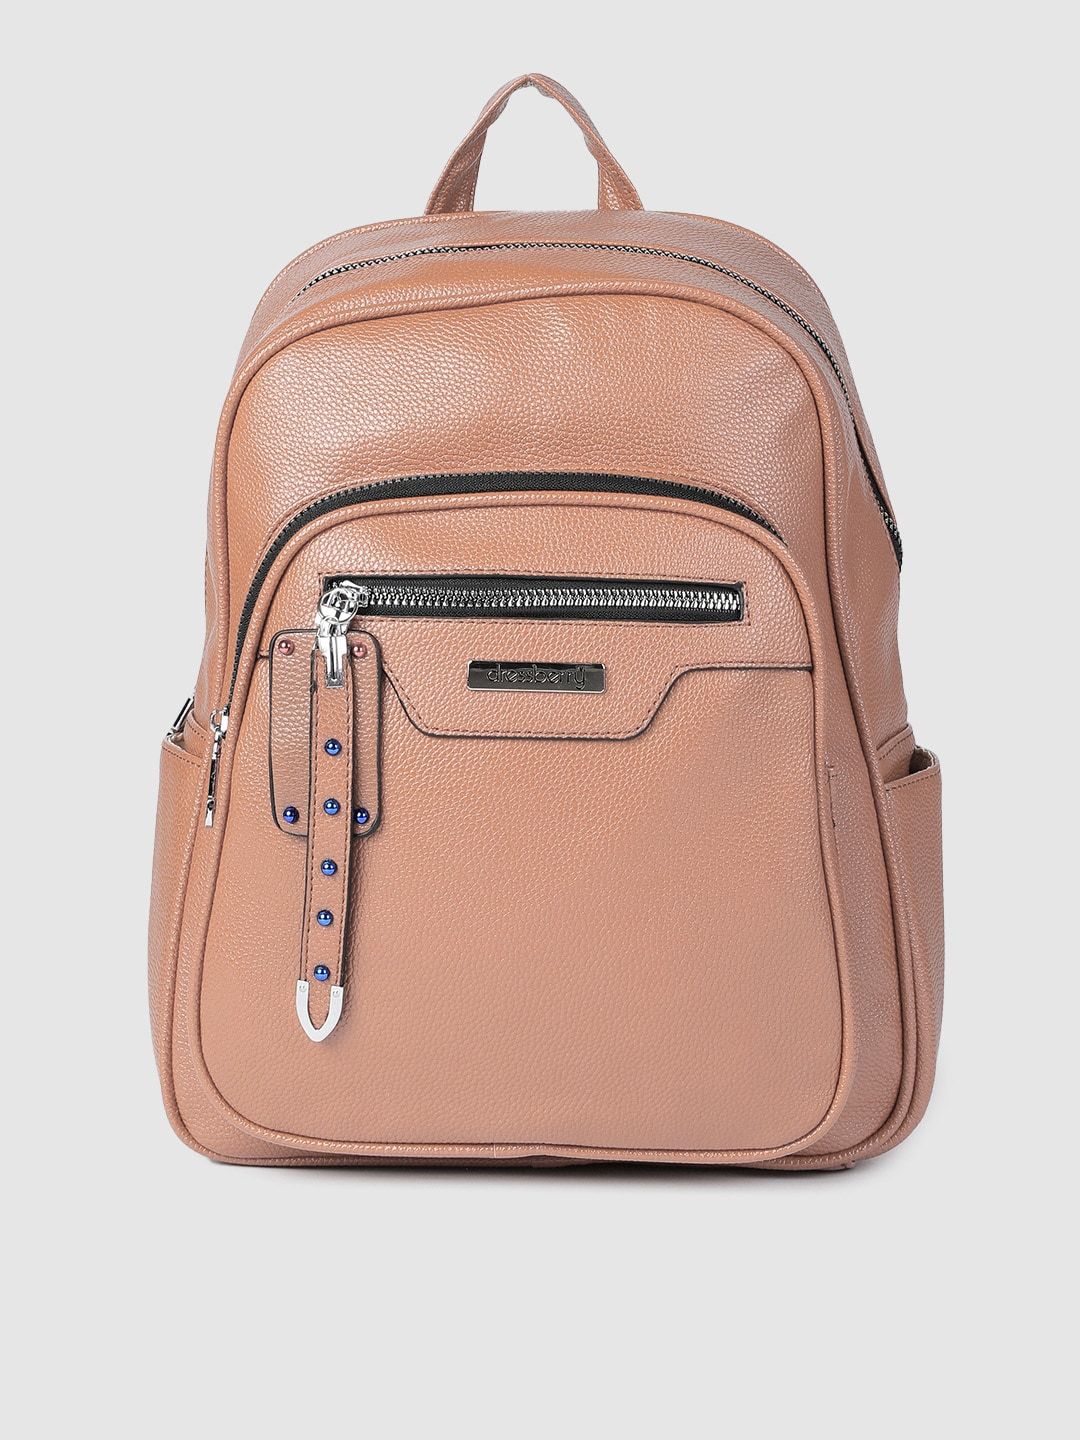 DressBerry Women Pink Solid Backpack Price in India